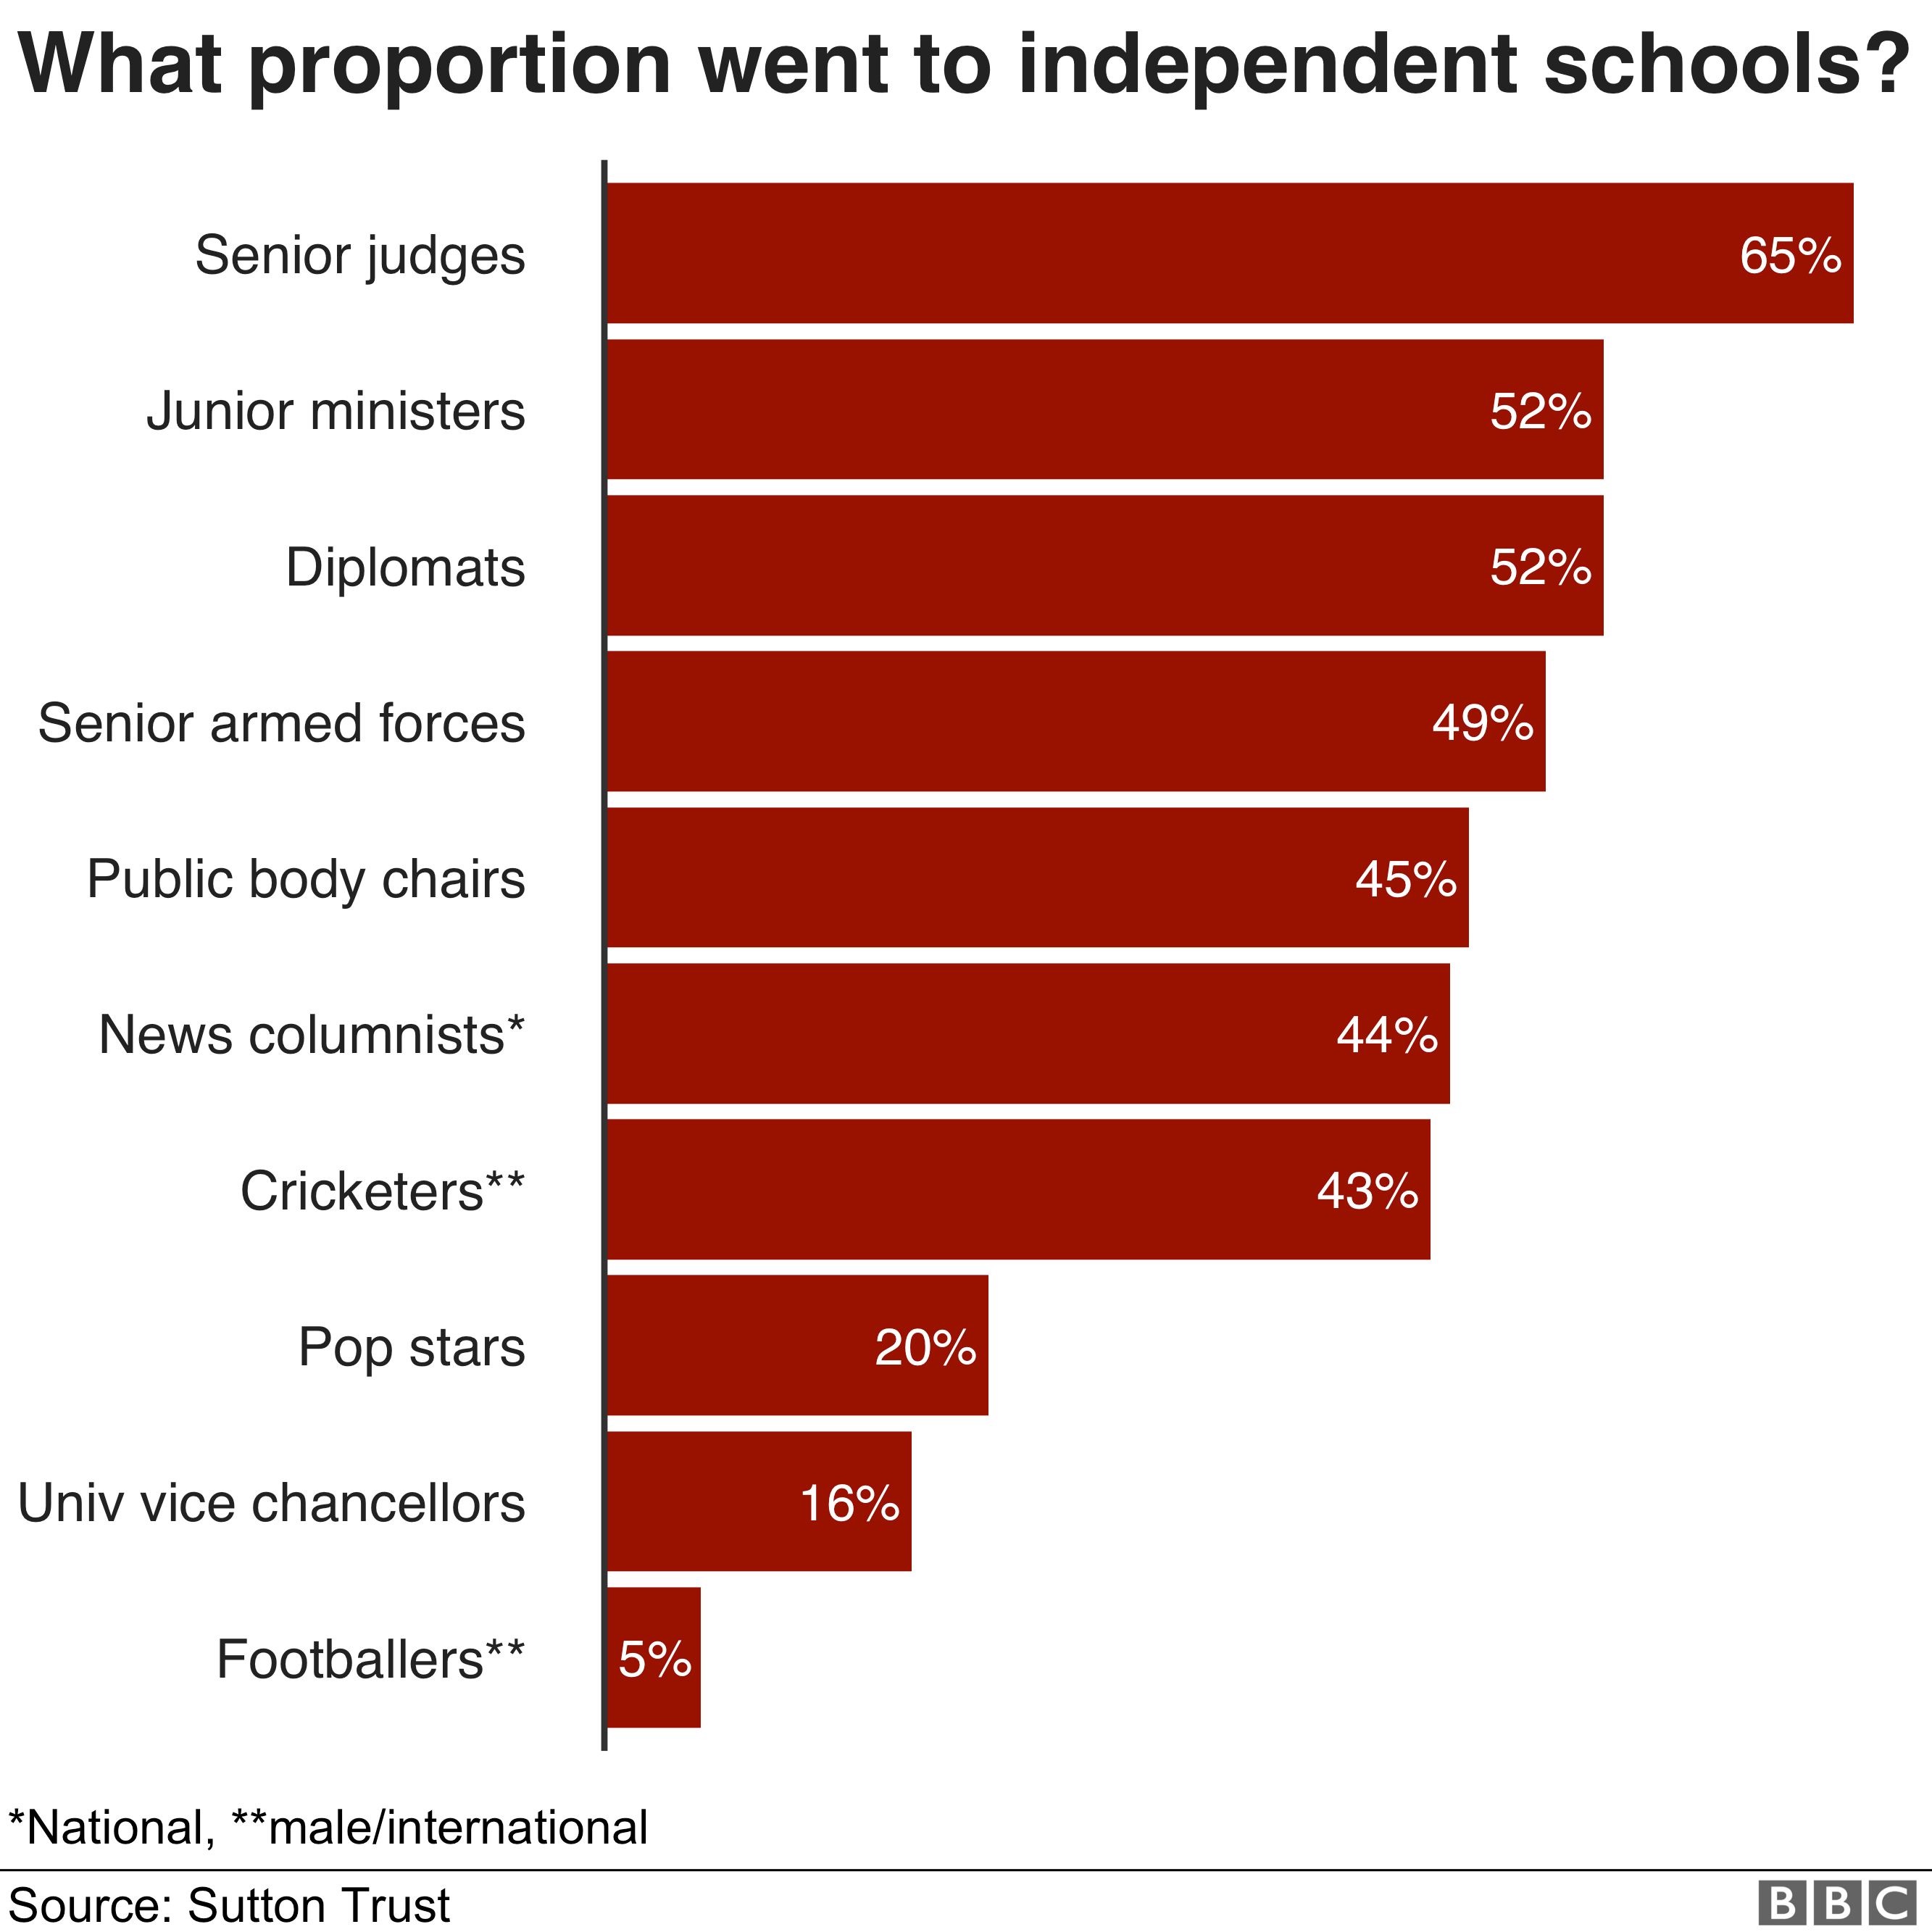 Professions and independent schools